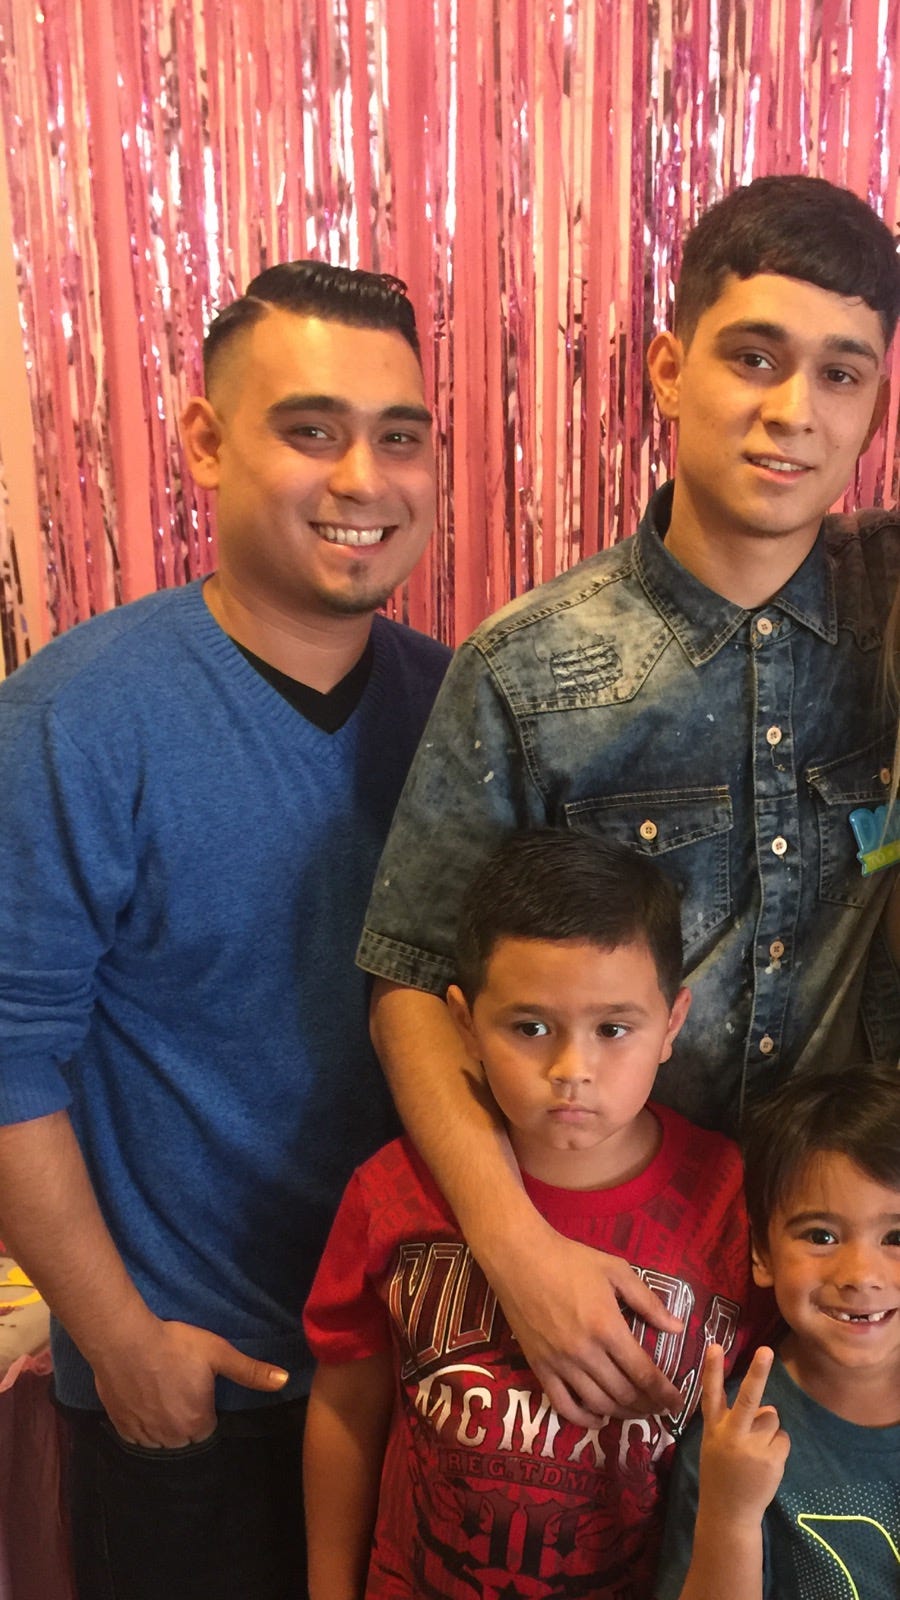 Richard and Raymond Matus at a family event in 2017, the two have been incarcerated as co-defendants on a case since June 2018.